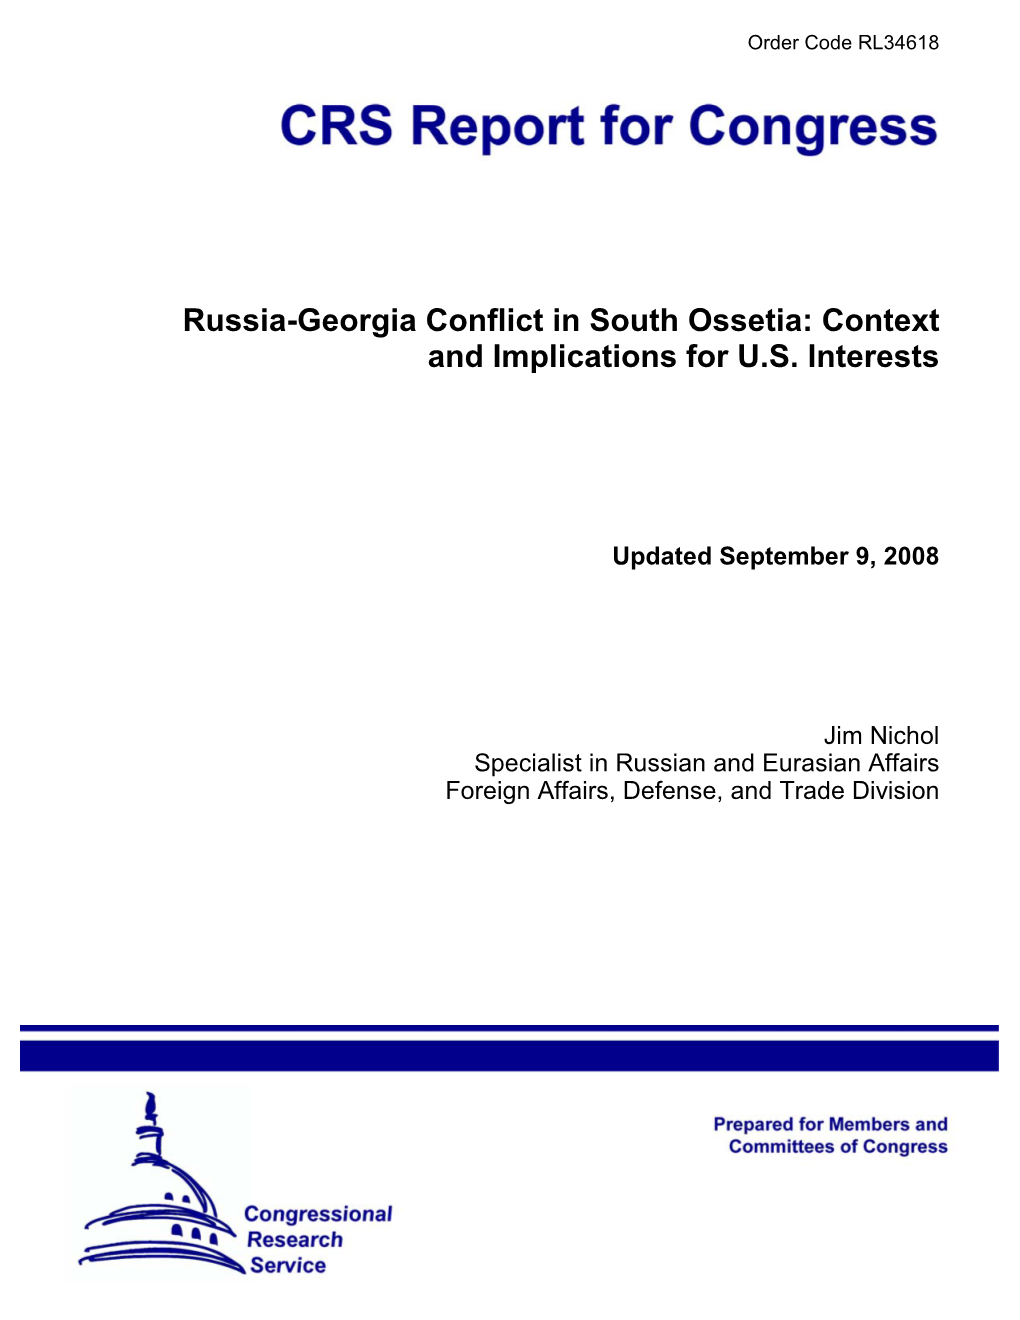 Russia-Georgia Conflict in South Ossetia: Context and Implications for U.S